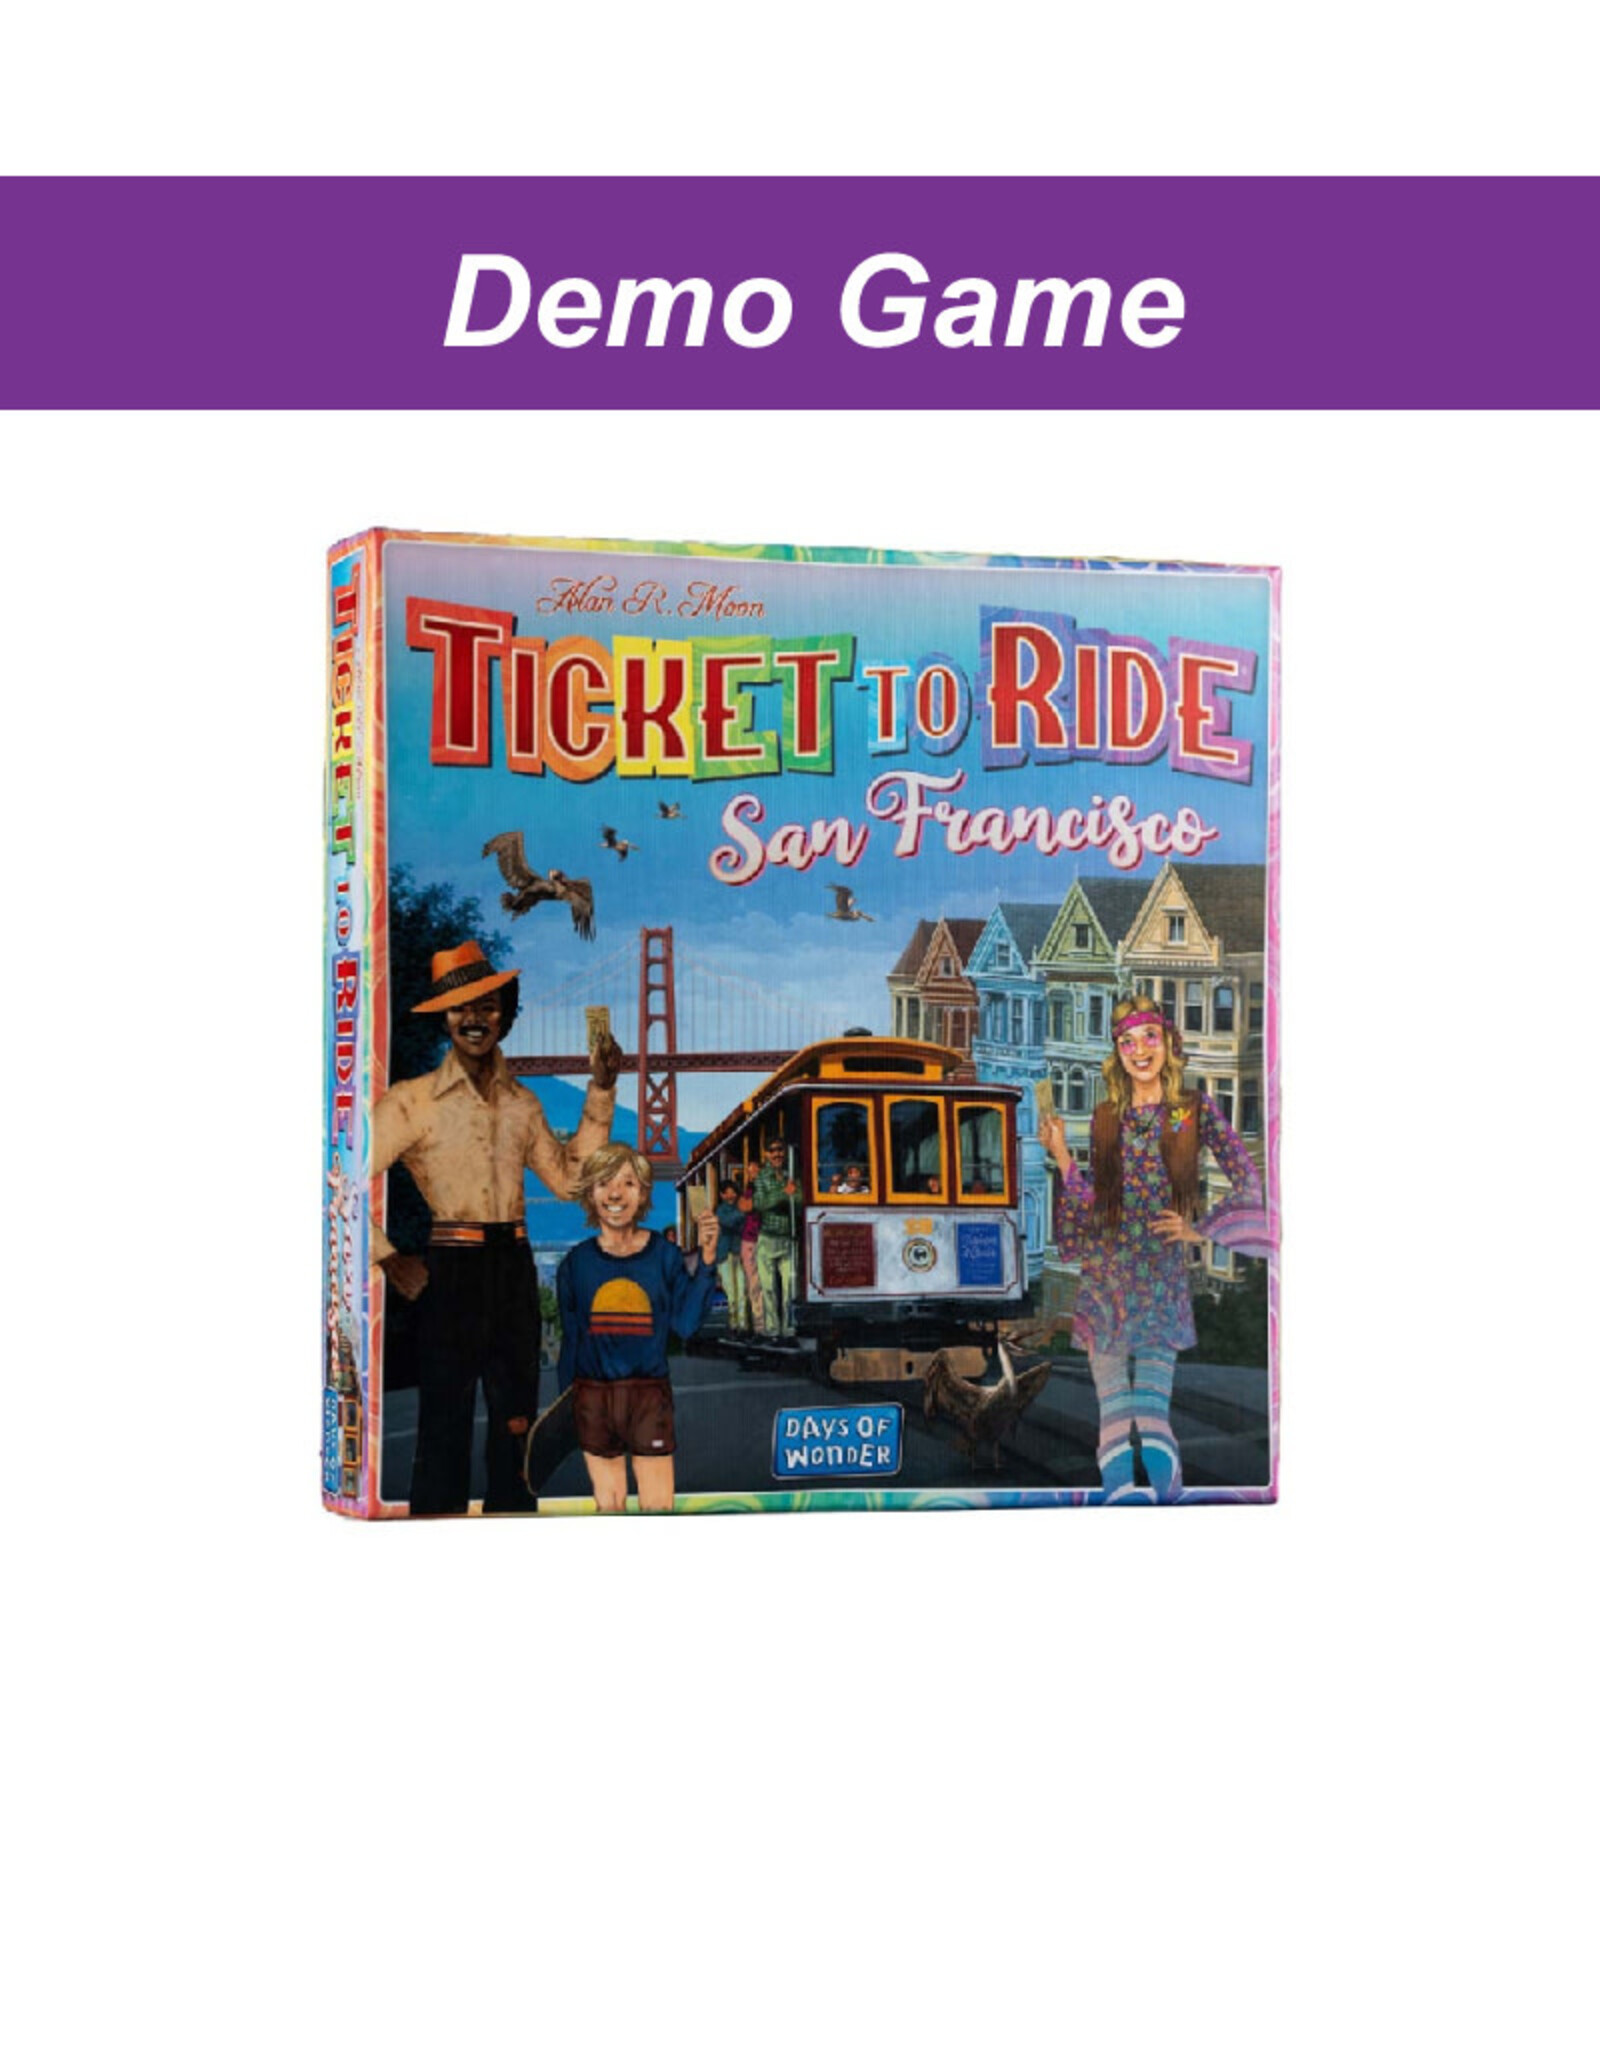 (DEMO) Ticket to Ride San Francisco. Free to Play In Store!